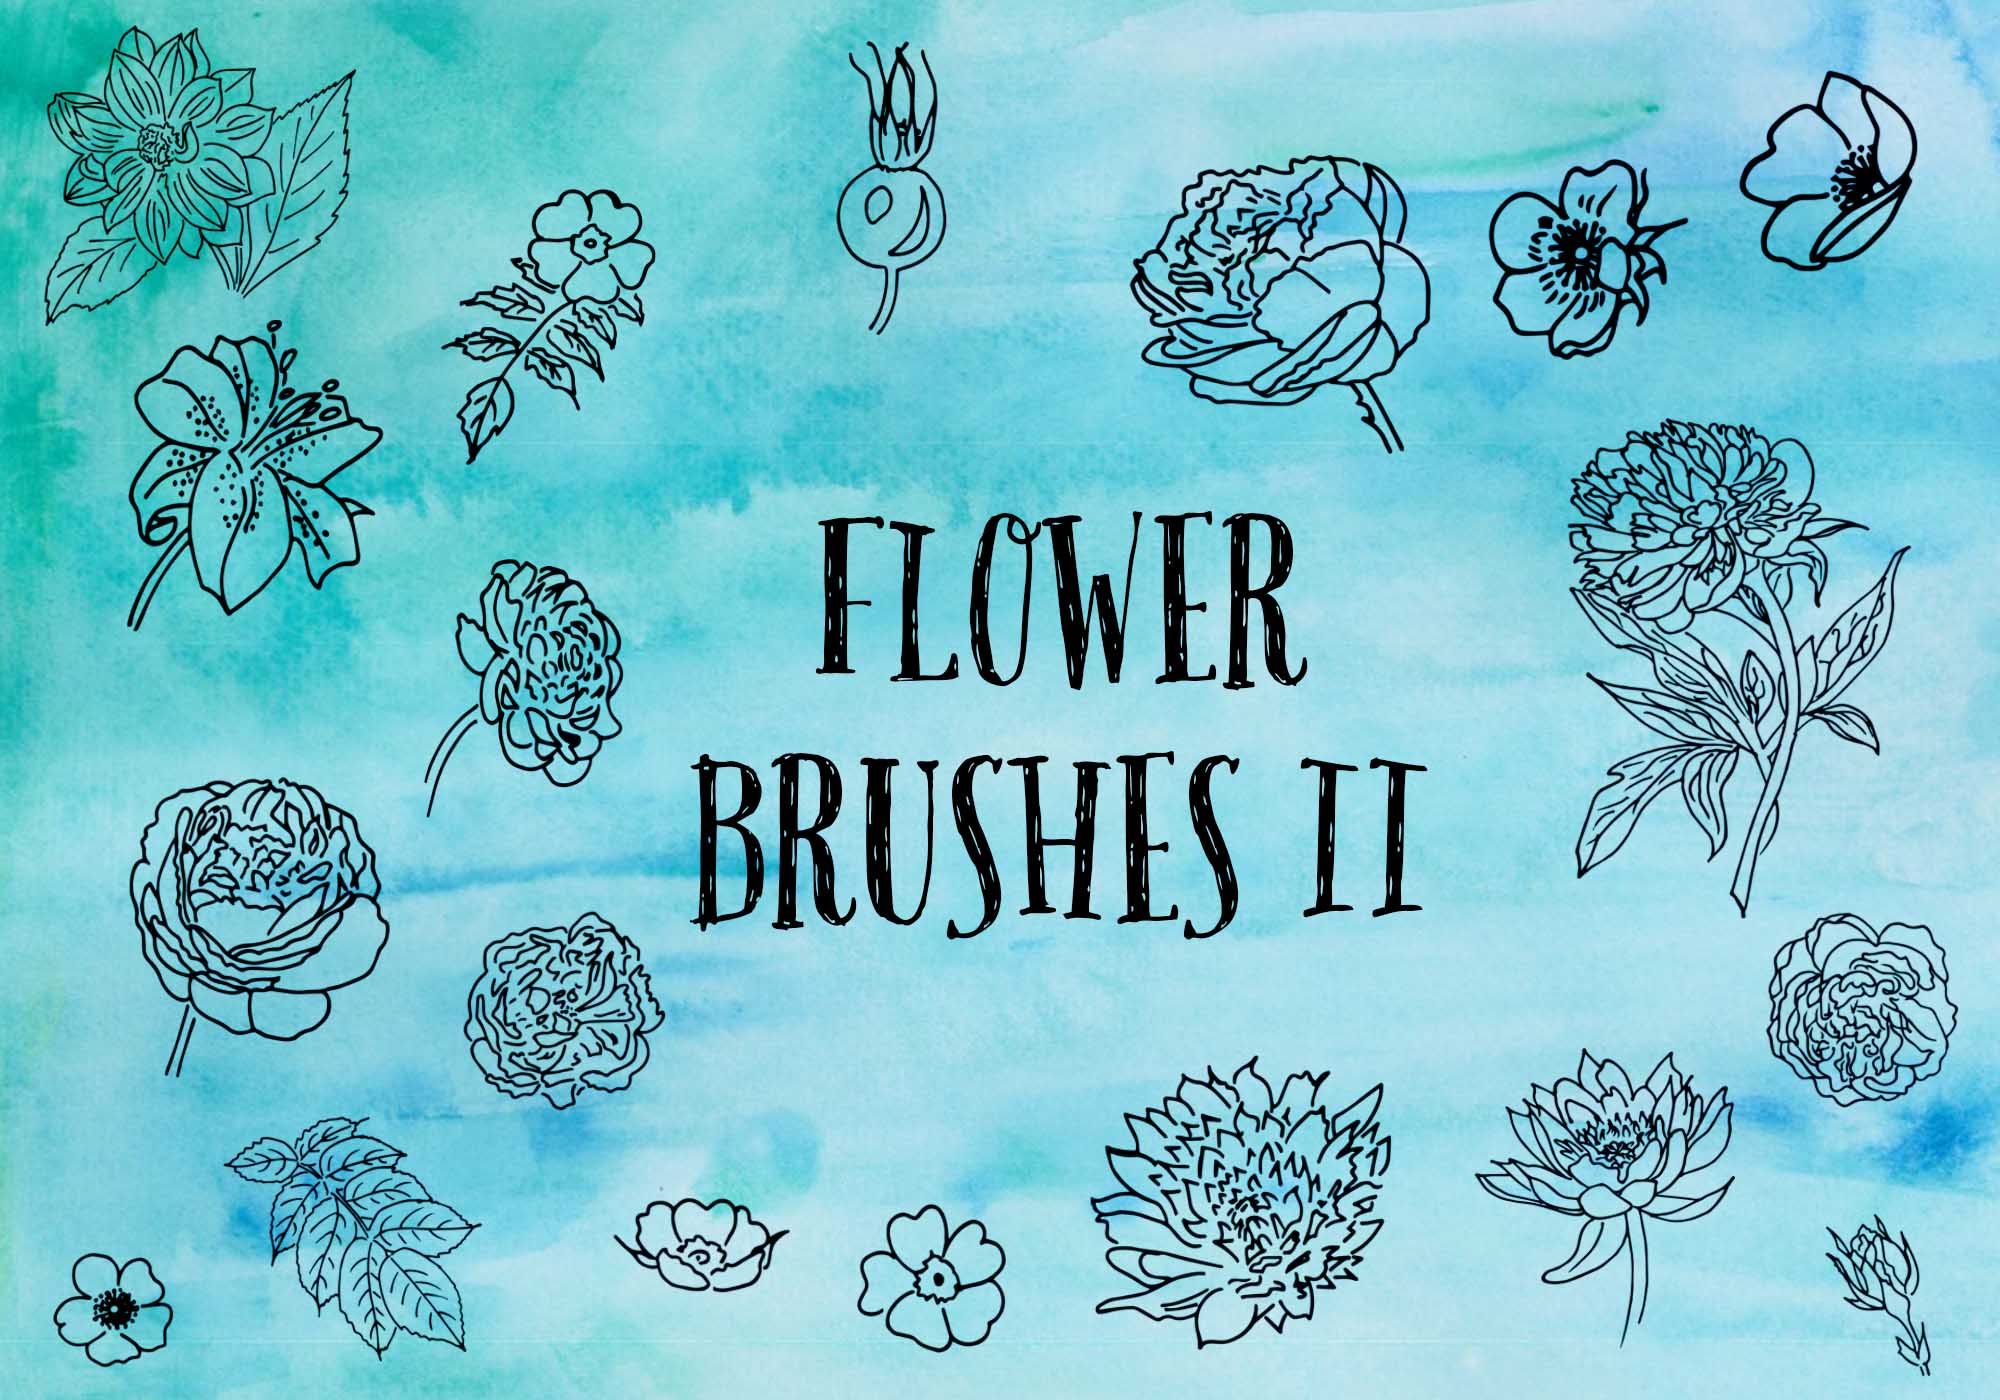 brushes photoshop free download flowers